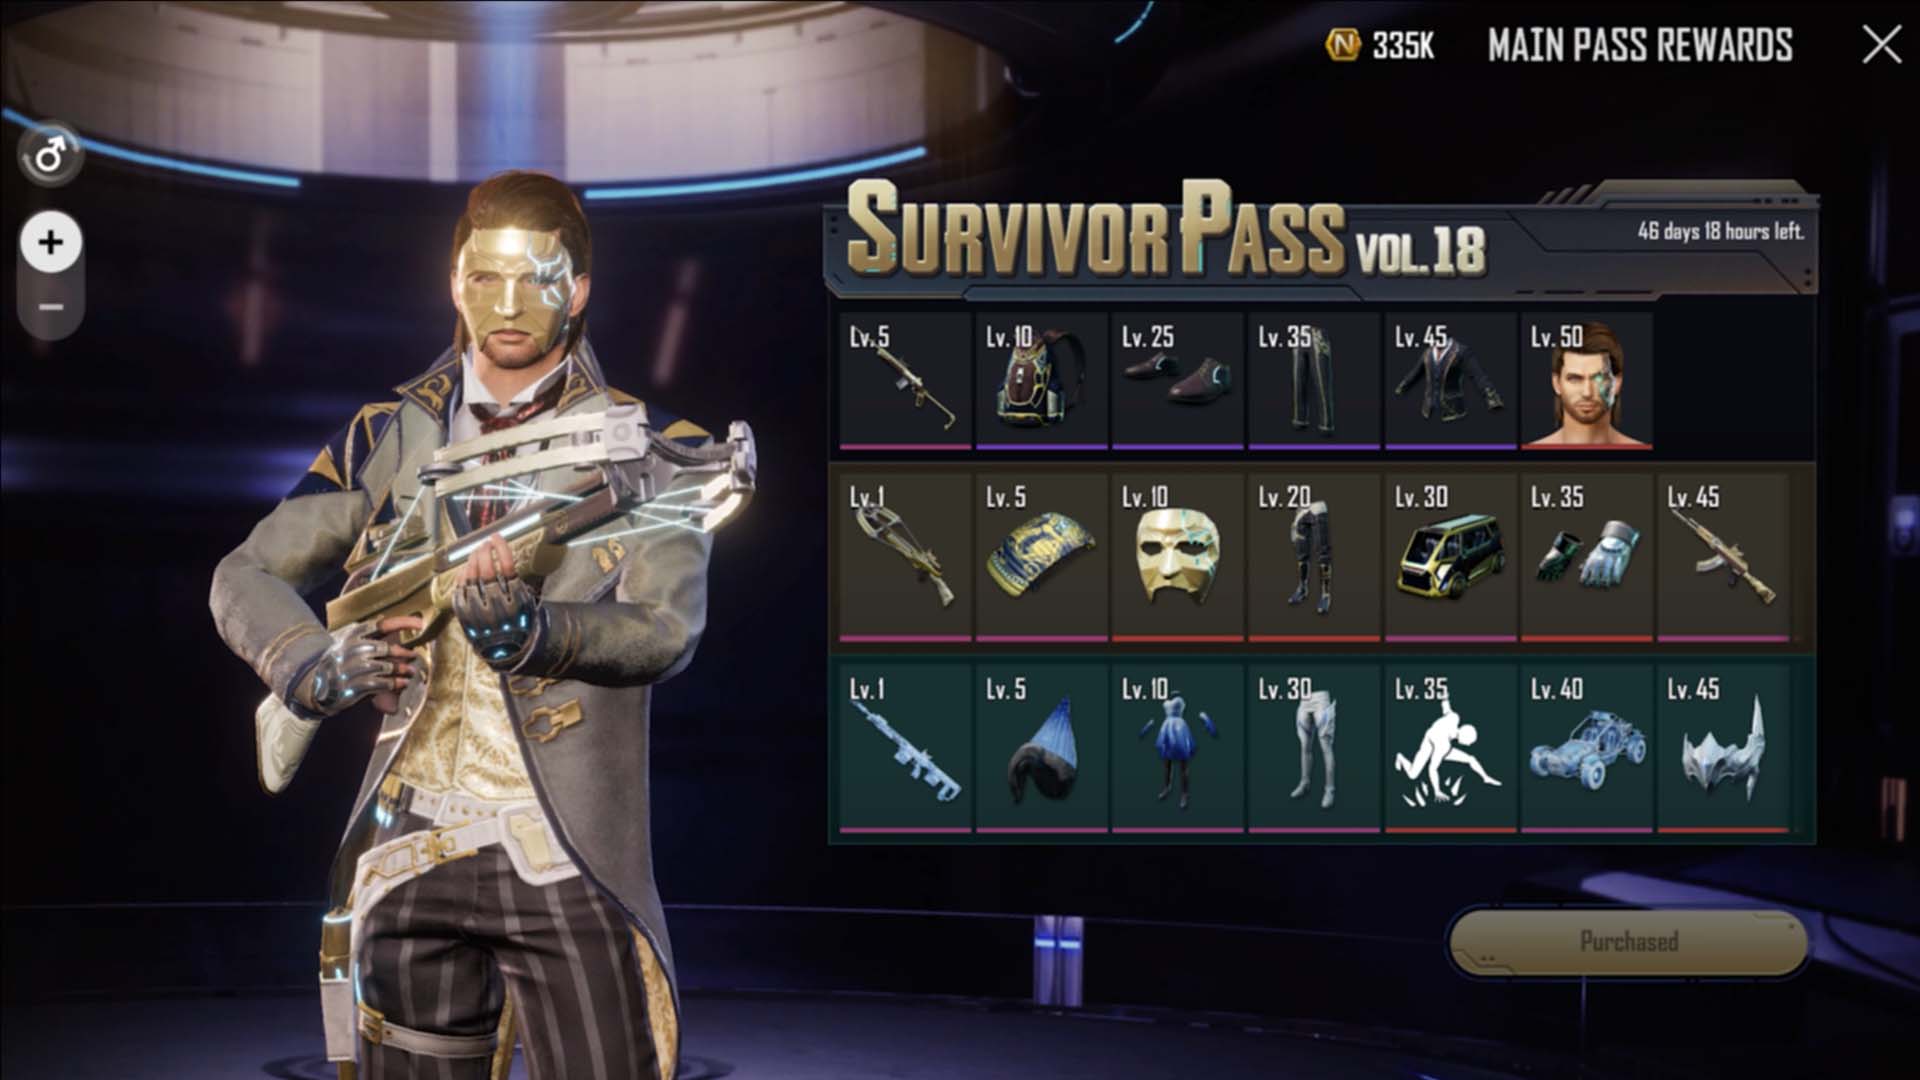 New State Mobile Survivor Pass Vol. 18: Achieve a certain pass level to get a free character!